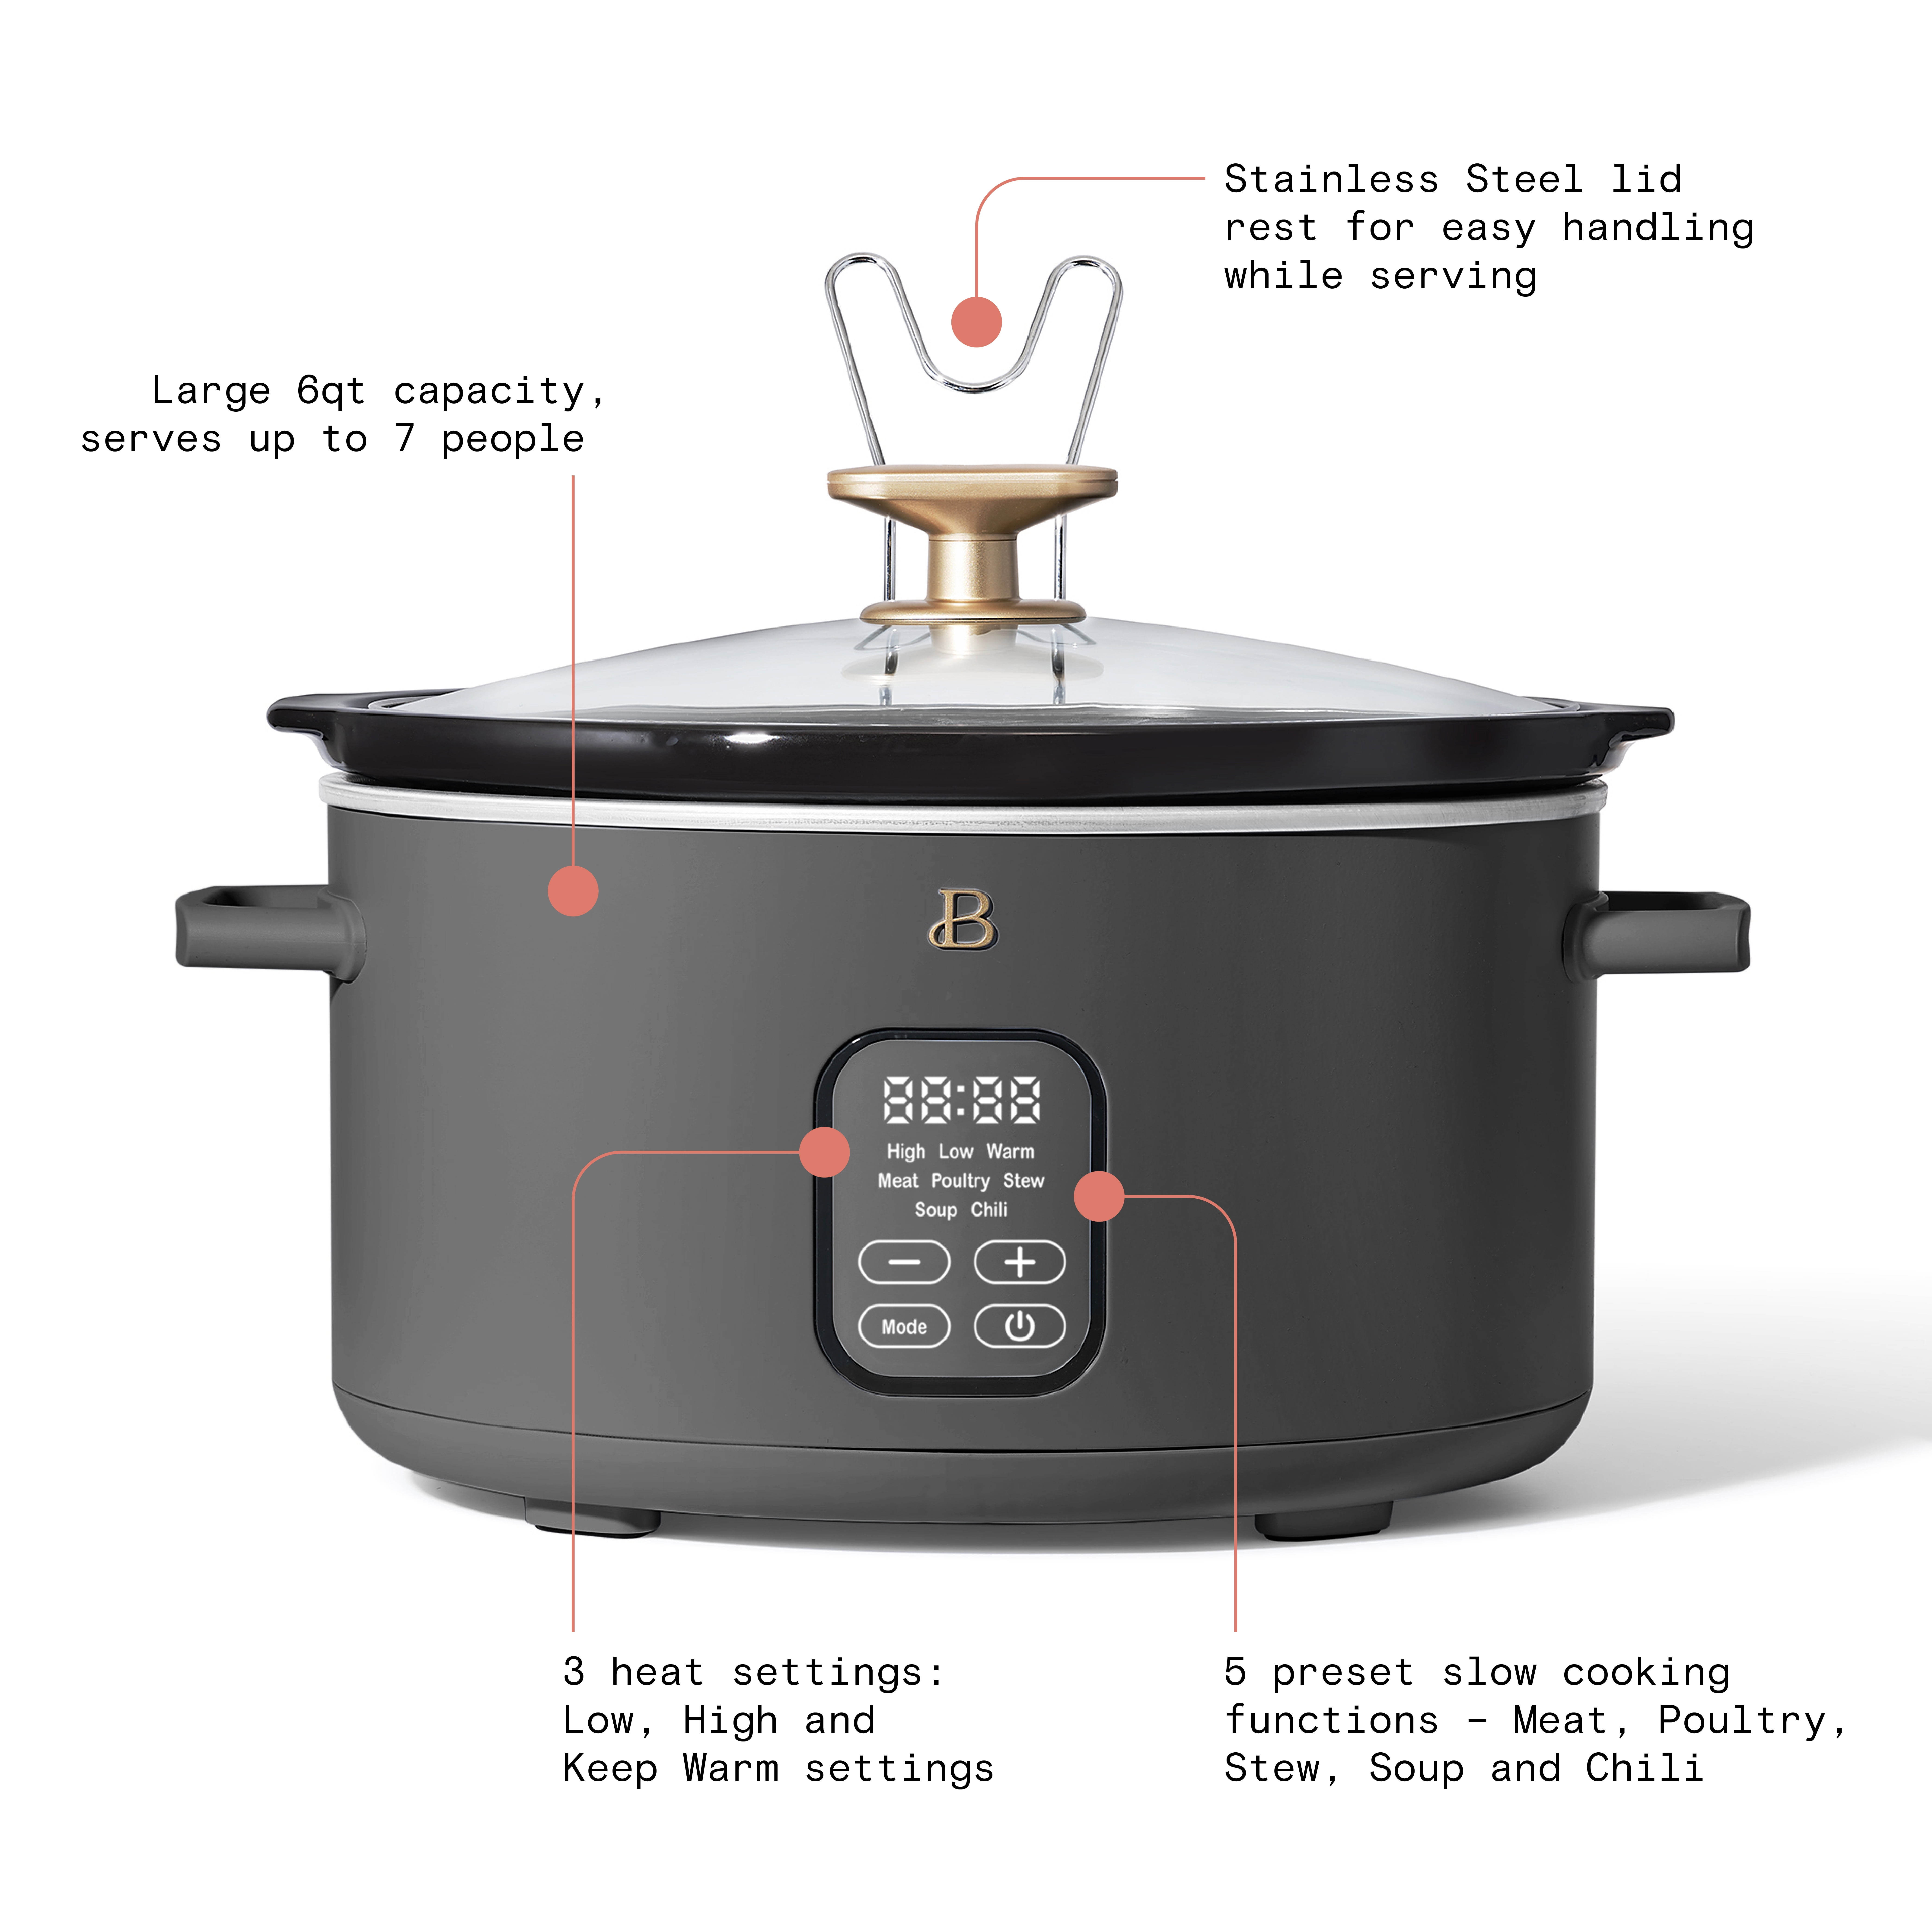 Tiny Crockpot is a big help for cook — at least for now